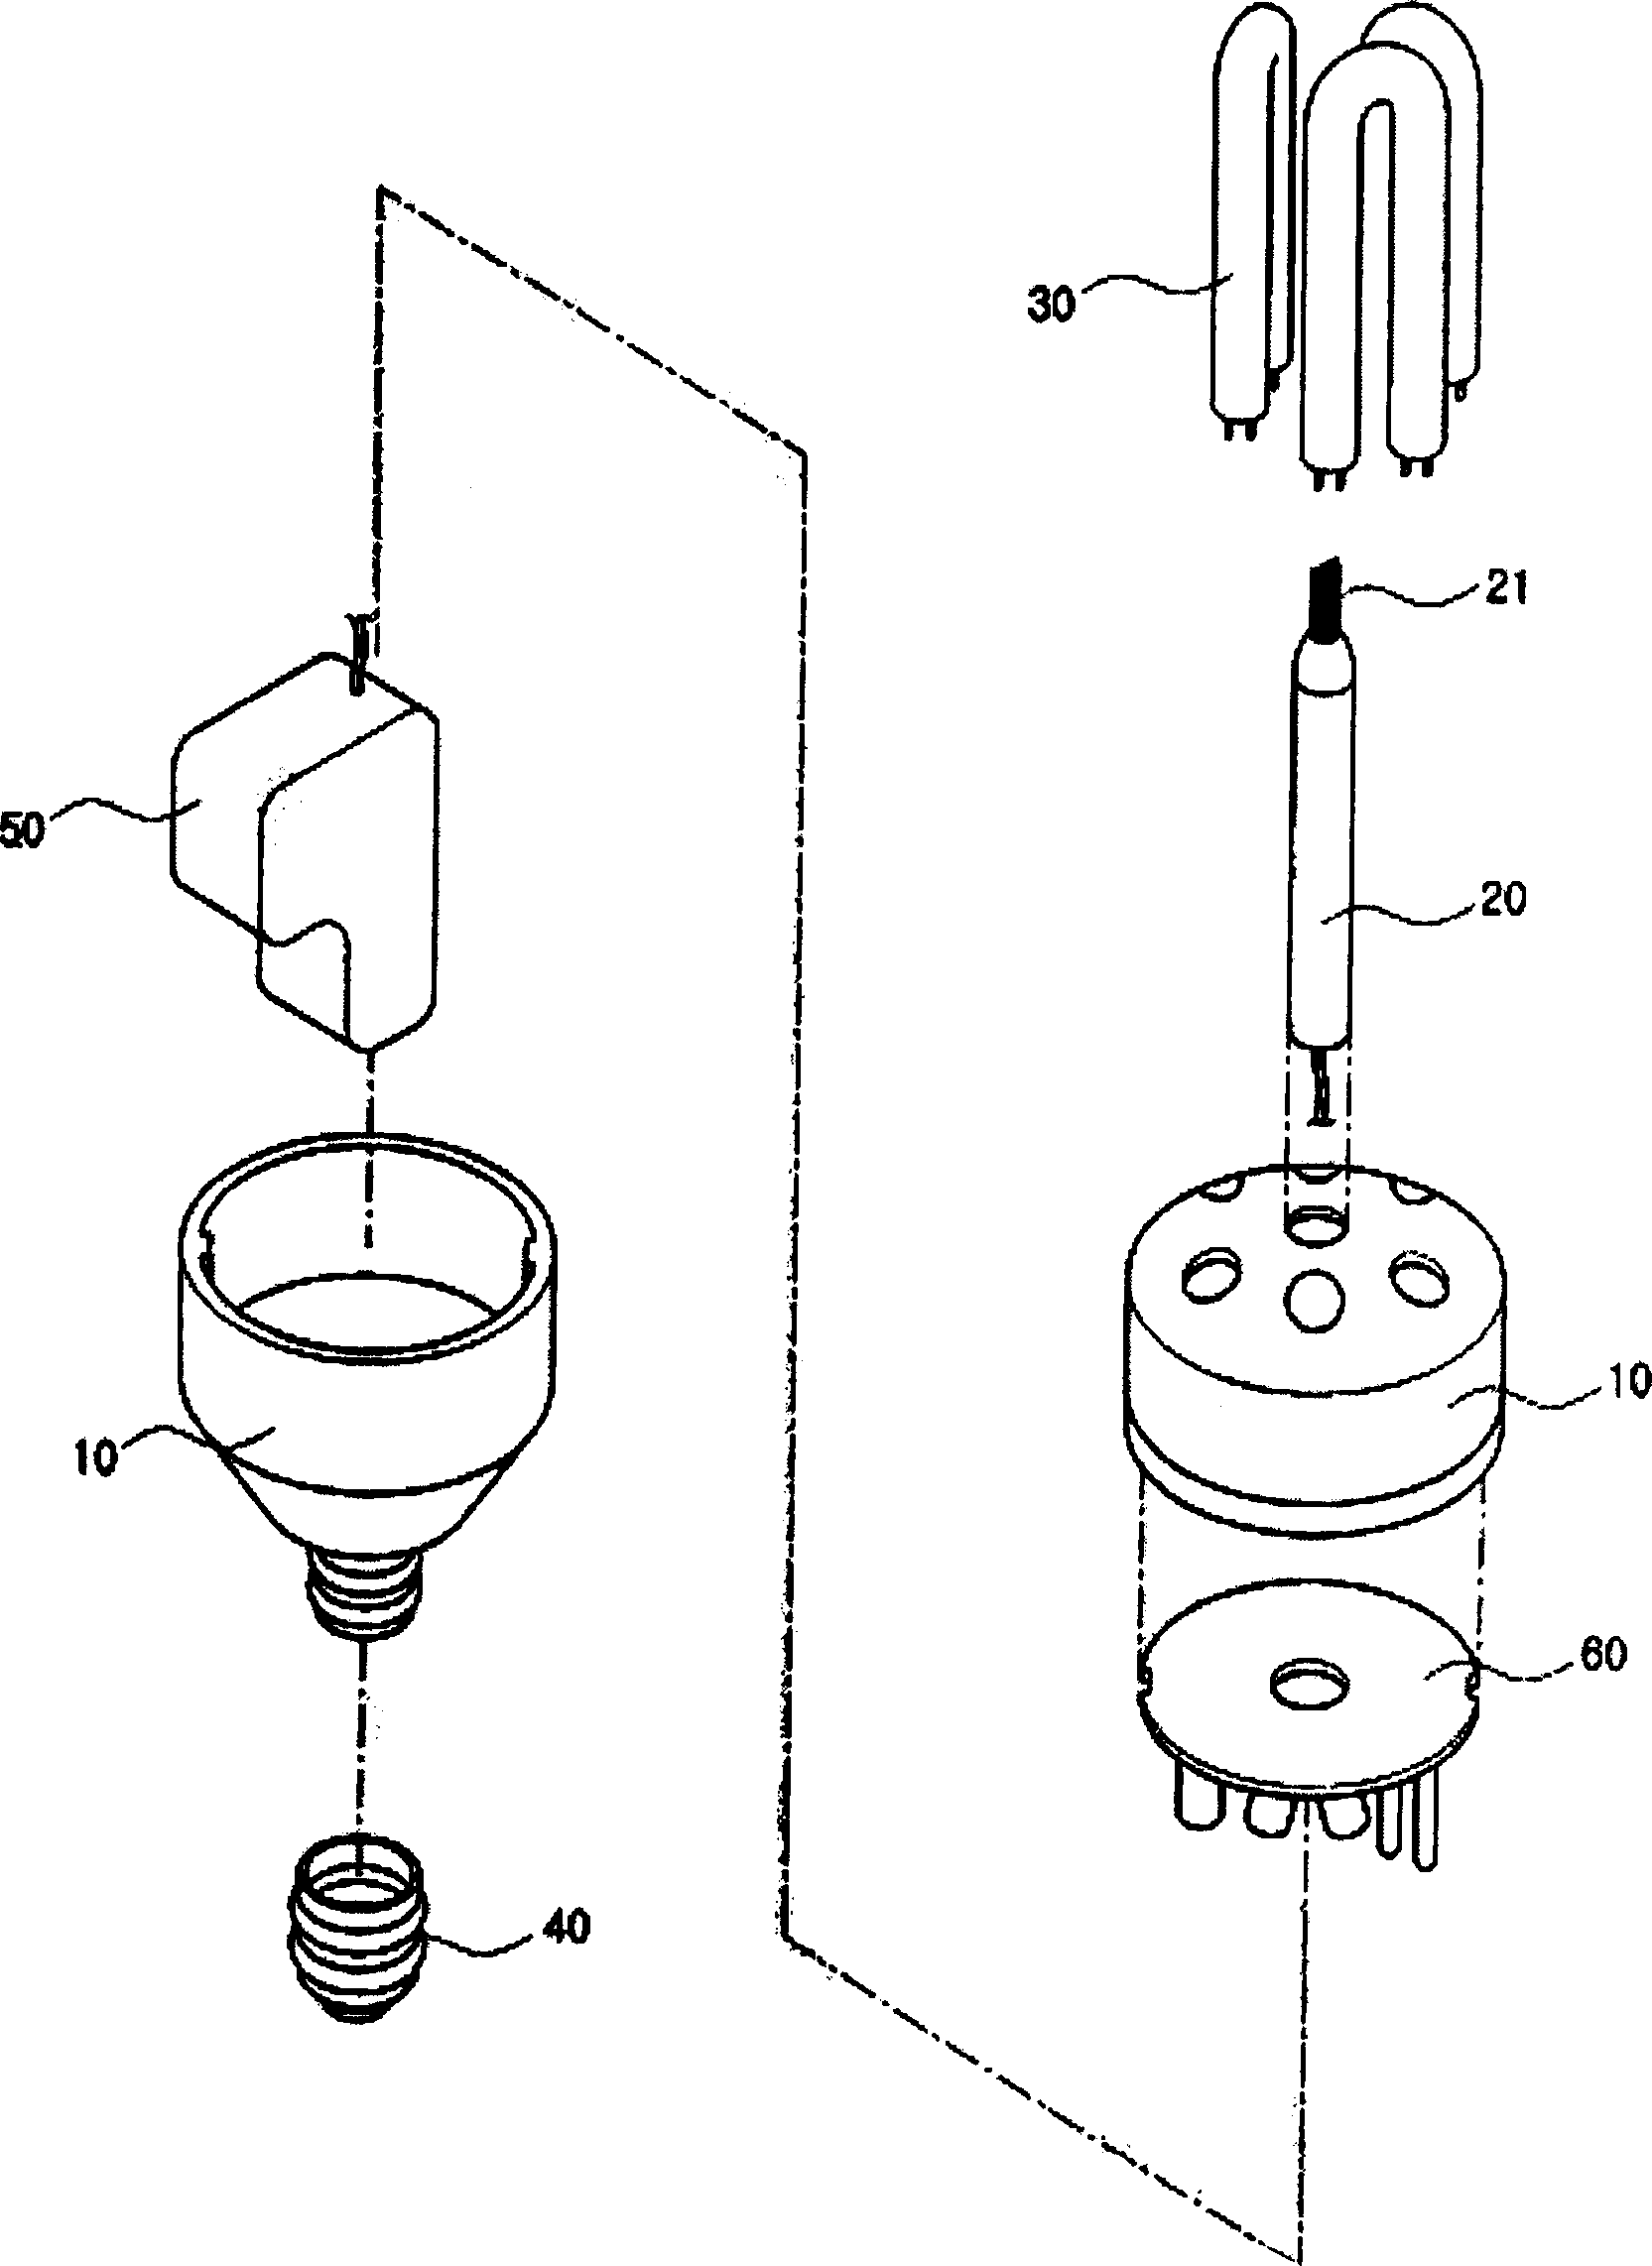 Lighting apparatus for generating anions and purifying air